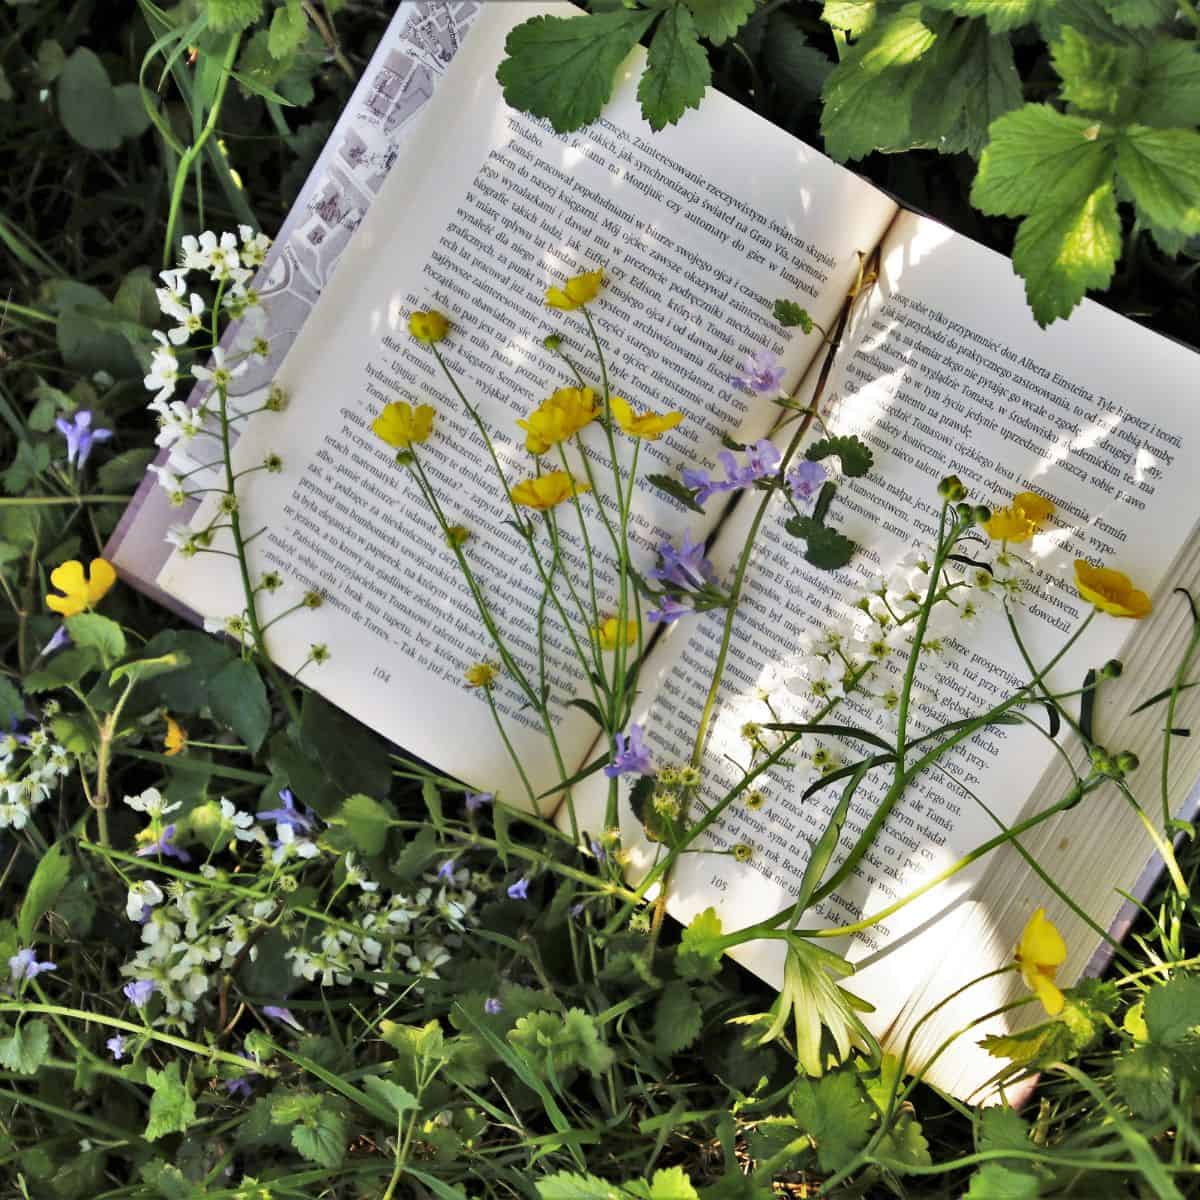 25 Famous Literary Quotes About Spring to Inspire You